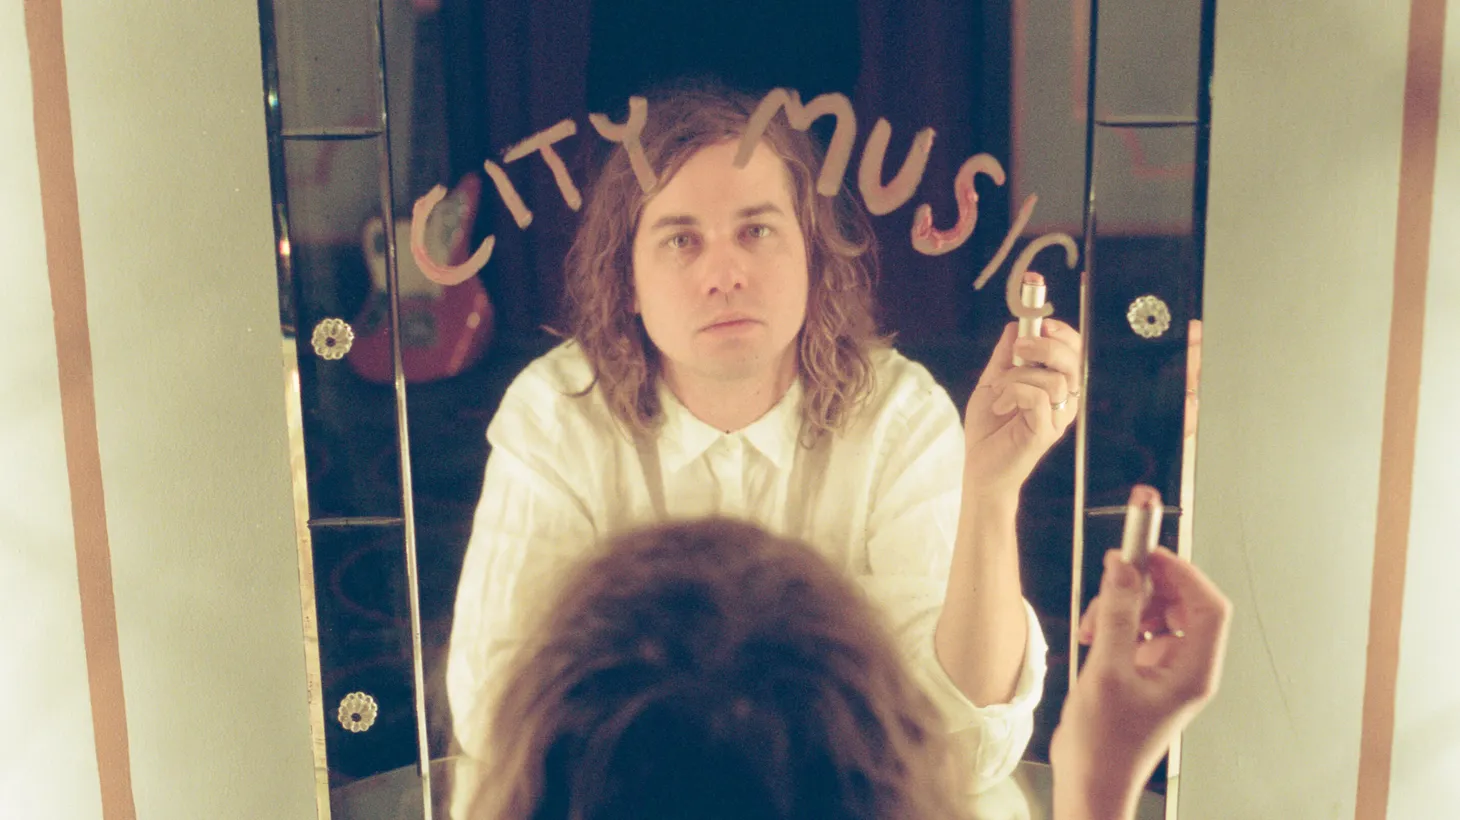 Kevin Morby is a well-traveled singer/songwriter with a voice and perspective well beyond his years. The Kansas City native is now based in LA and joins us for a live set just a few days before the release of his new album “City Music”.